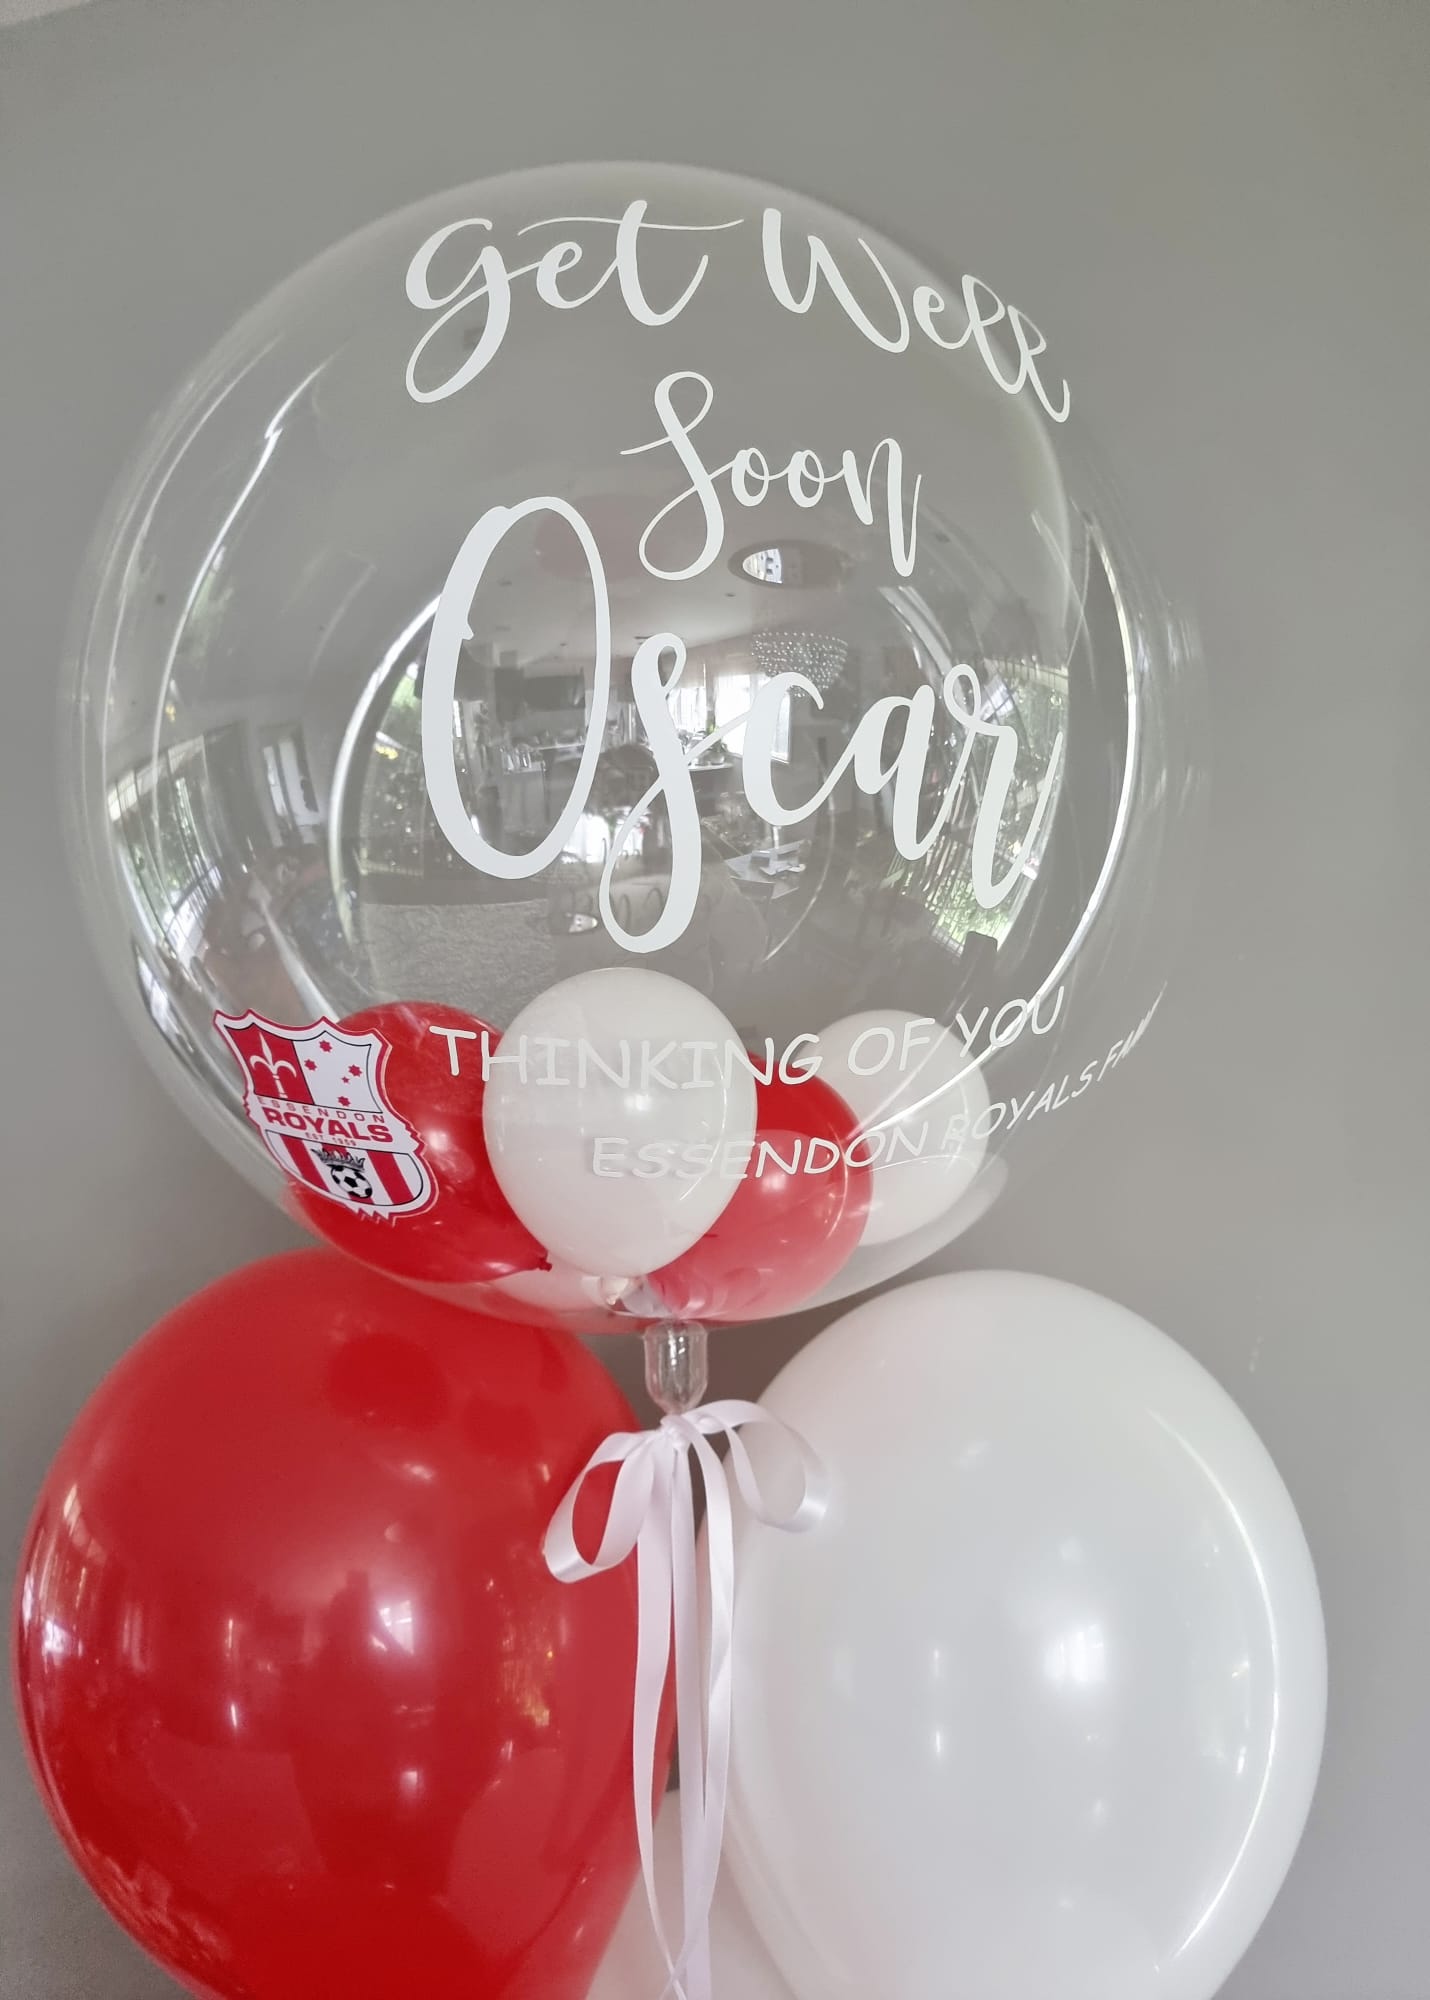 Red and White Personalised Balloon Bouquet Delivered in Melbourne 7 days Brand Logo Printed